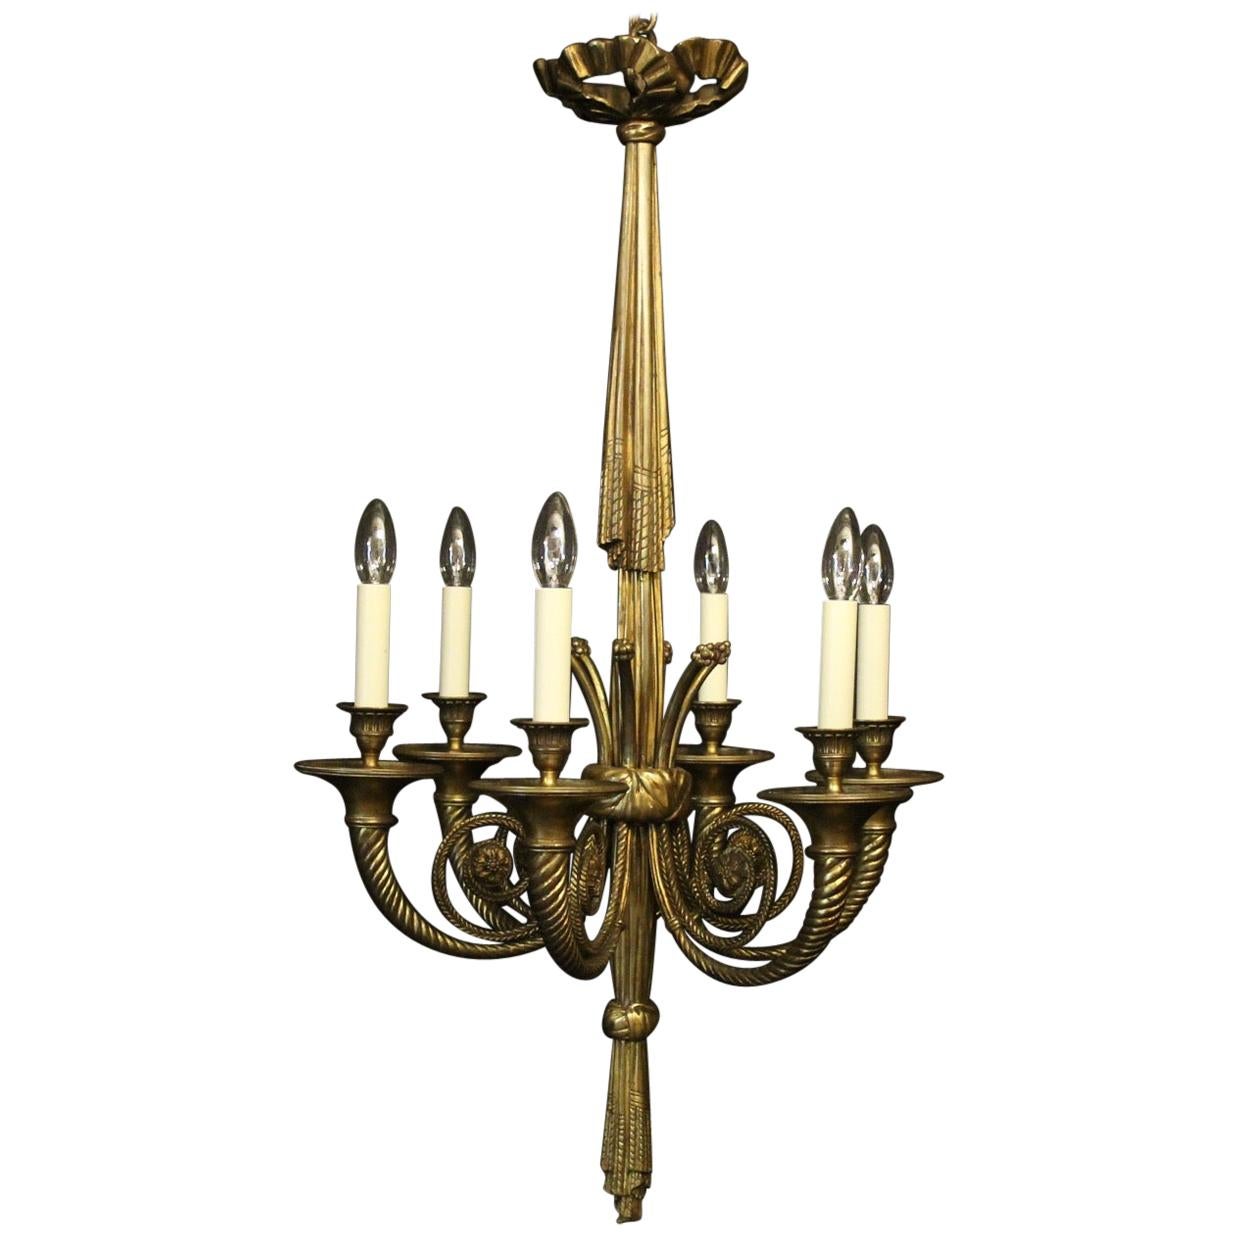 French 19th Century Gilded Bronze 6-Light Antique Chandelier For Sale